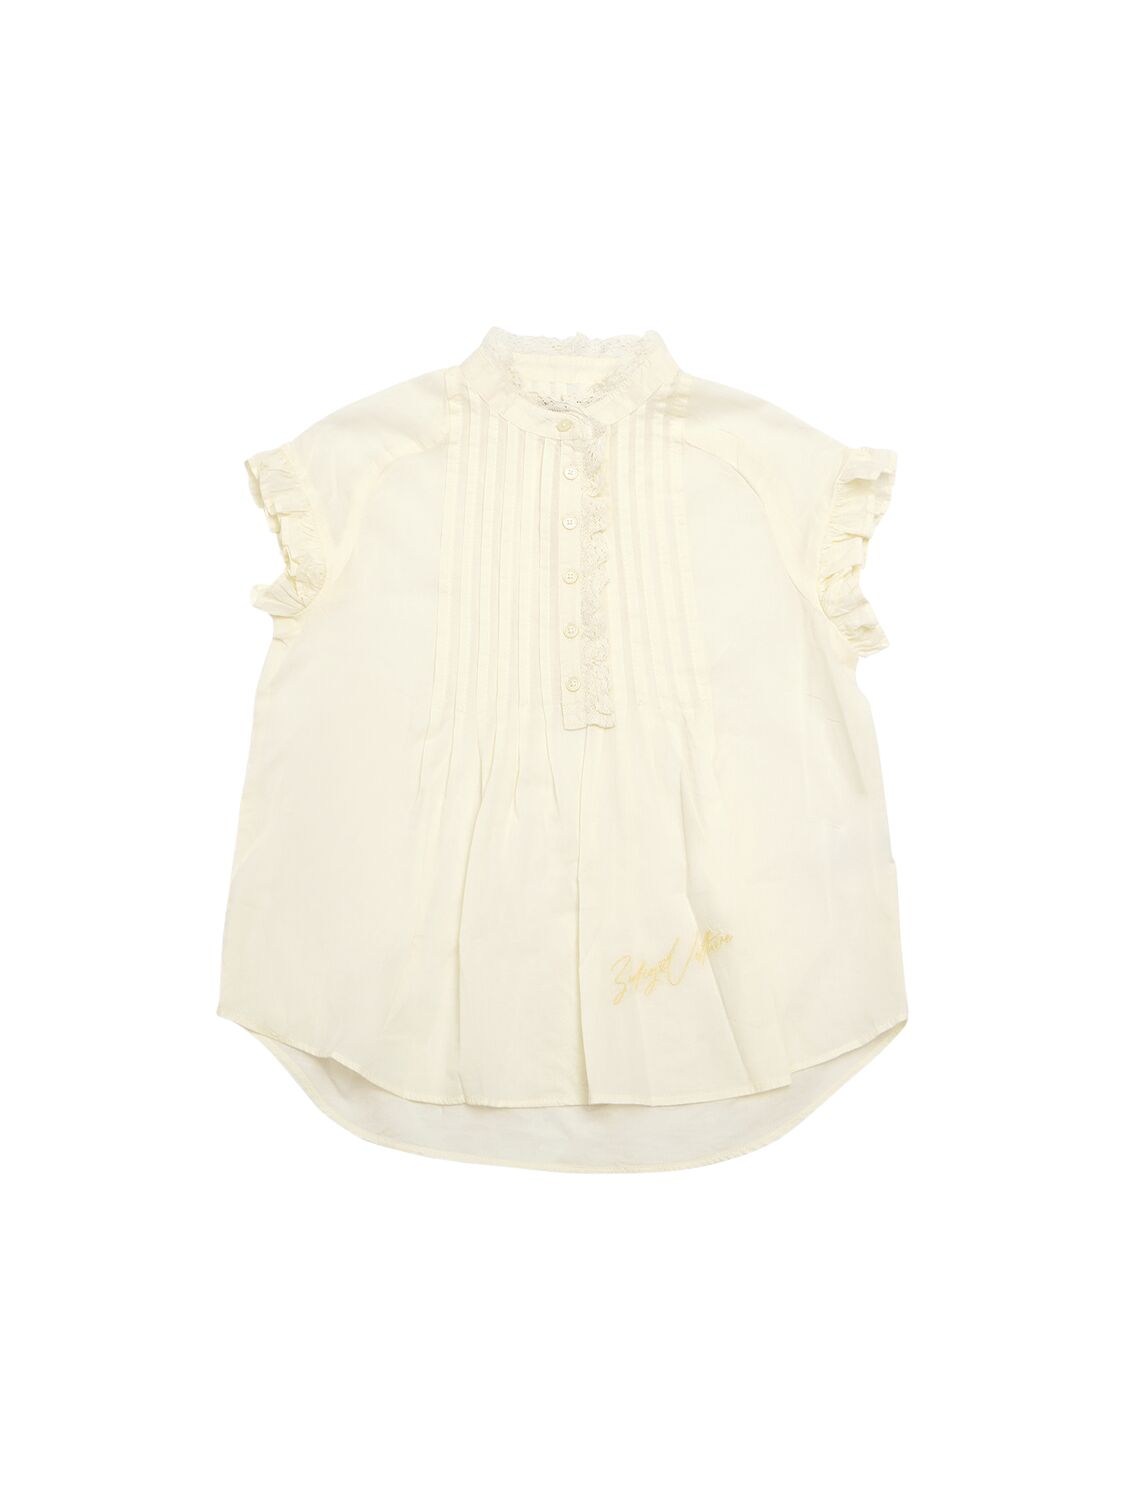 Image of Cotton Short Sleeved Shirt W/ Lace